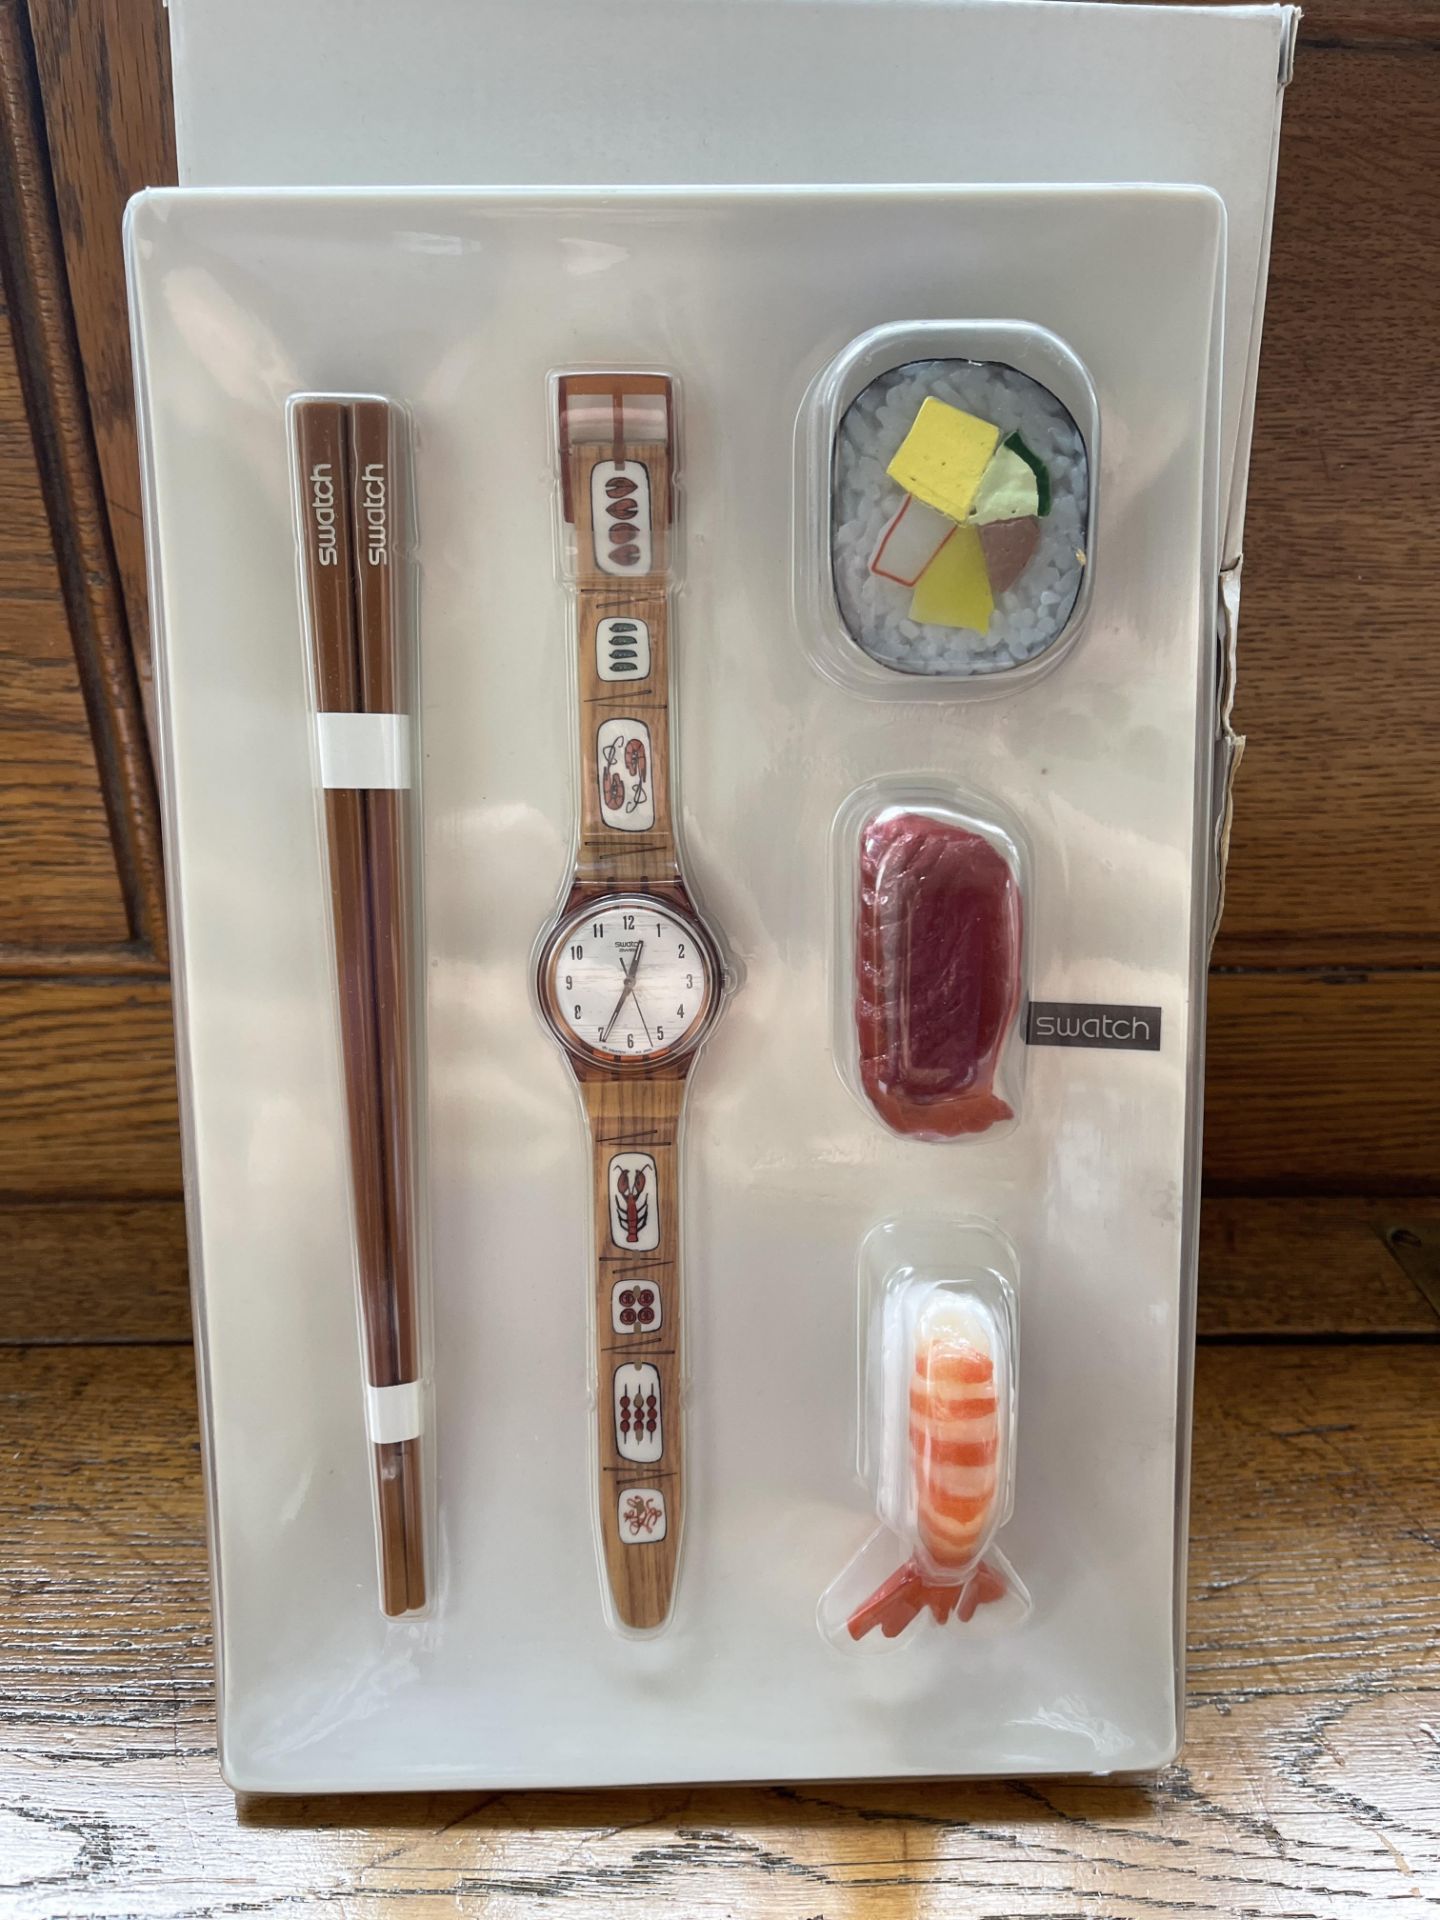 LOT OF WATCHES, BRAND NEW SEALED SUSHI PLATE SWATCH WATCH IN BOX - Image 2 of 3